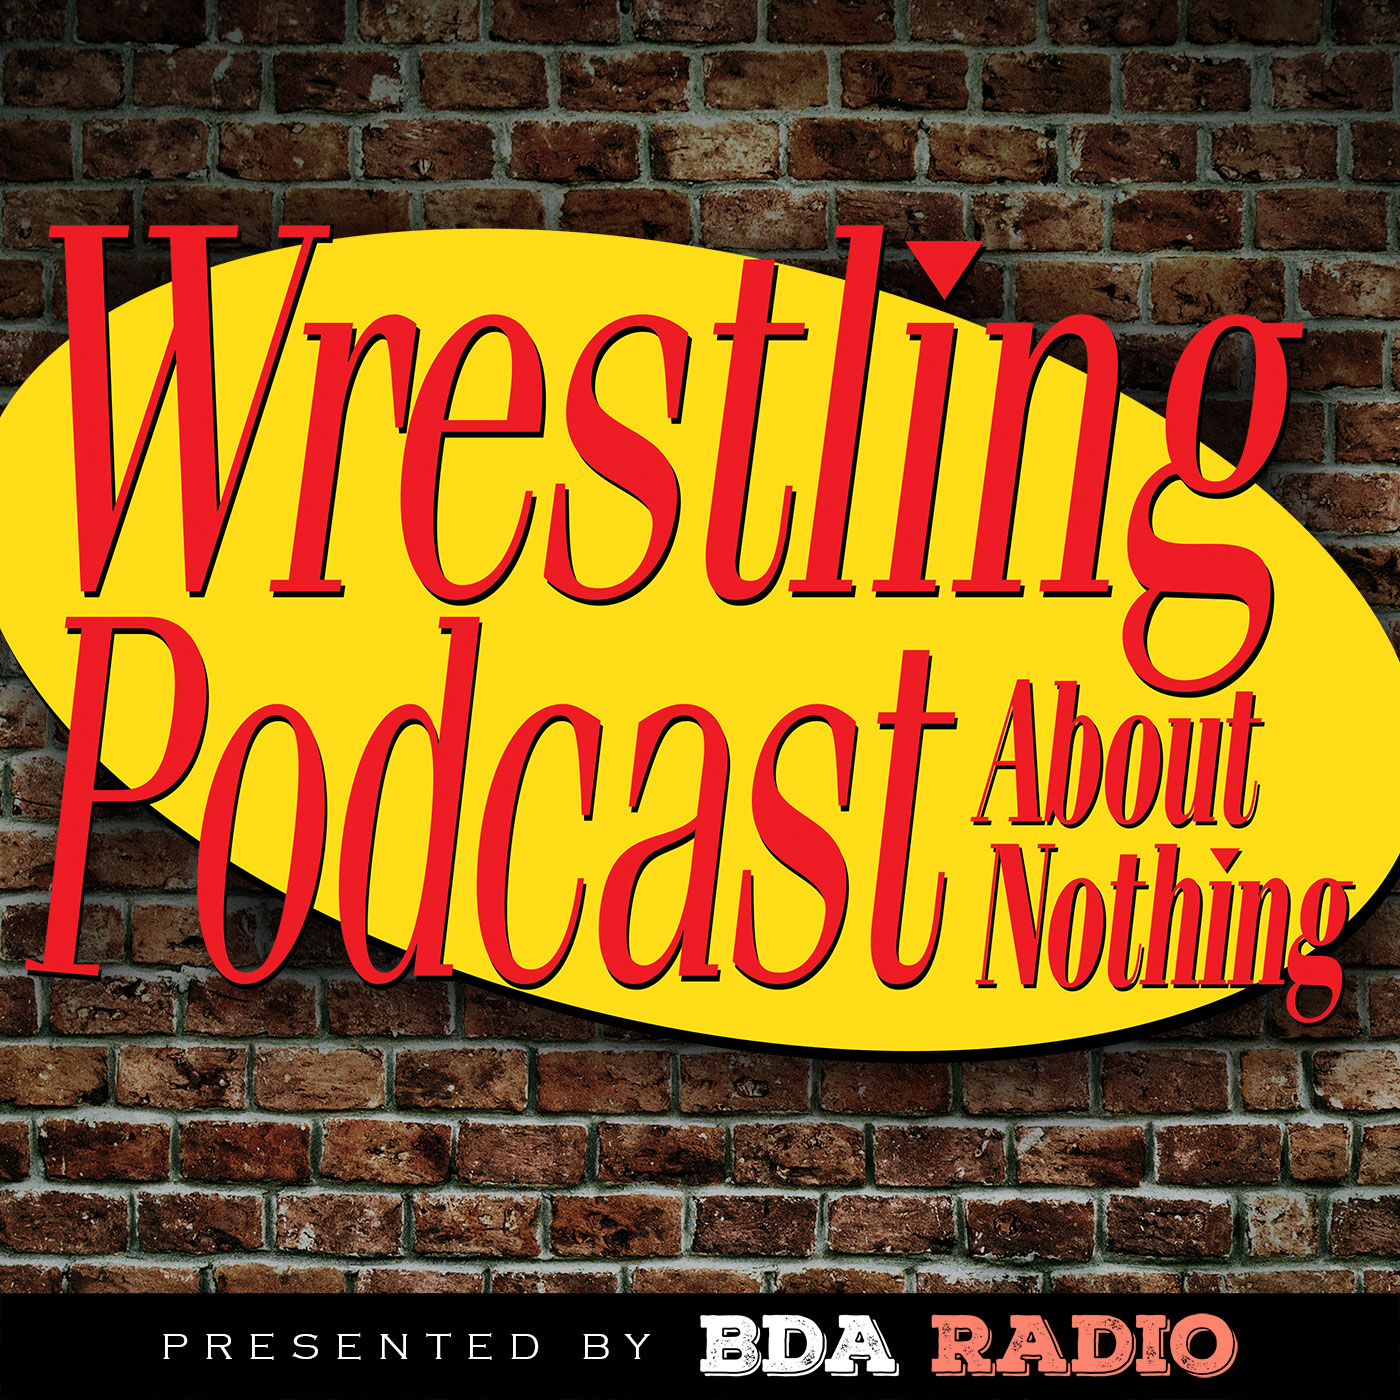 The Crossover - Wrestling Podcast About Nothing - Episode 003